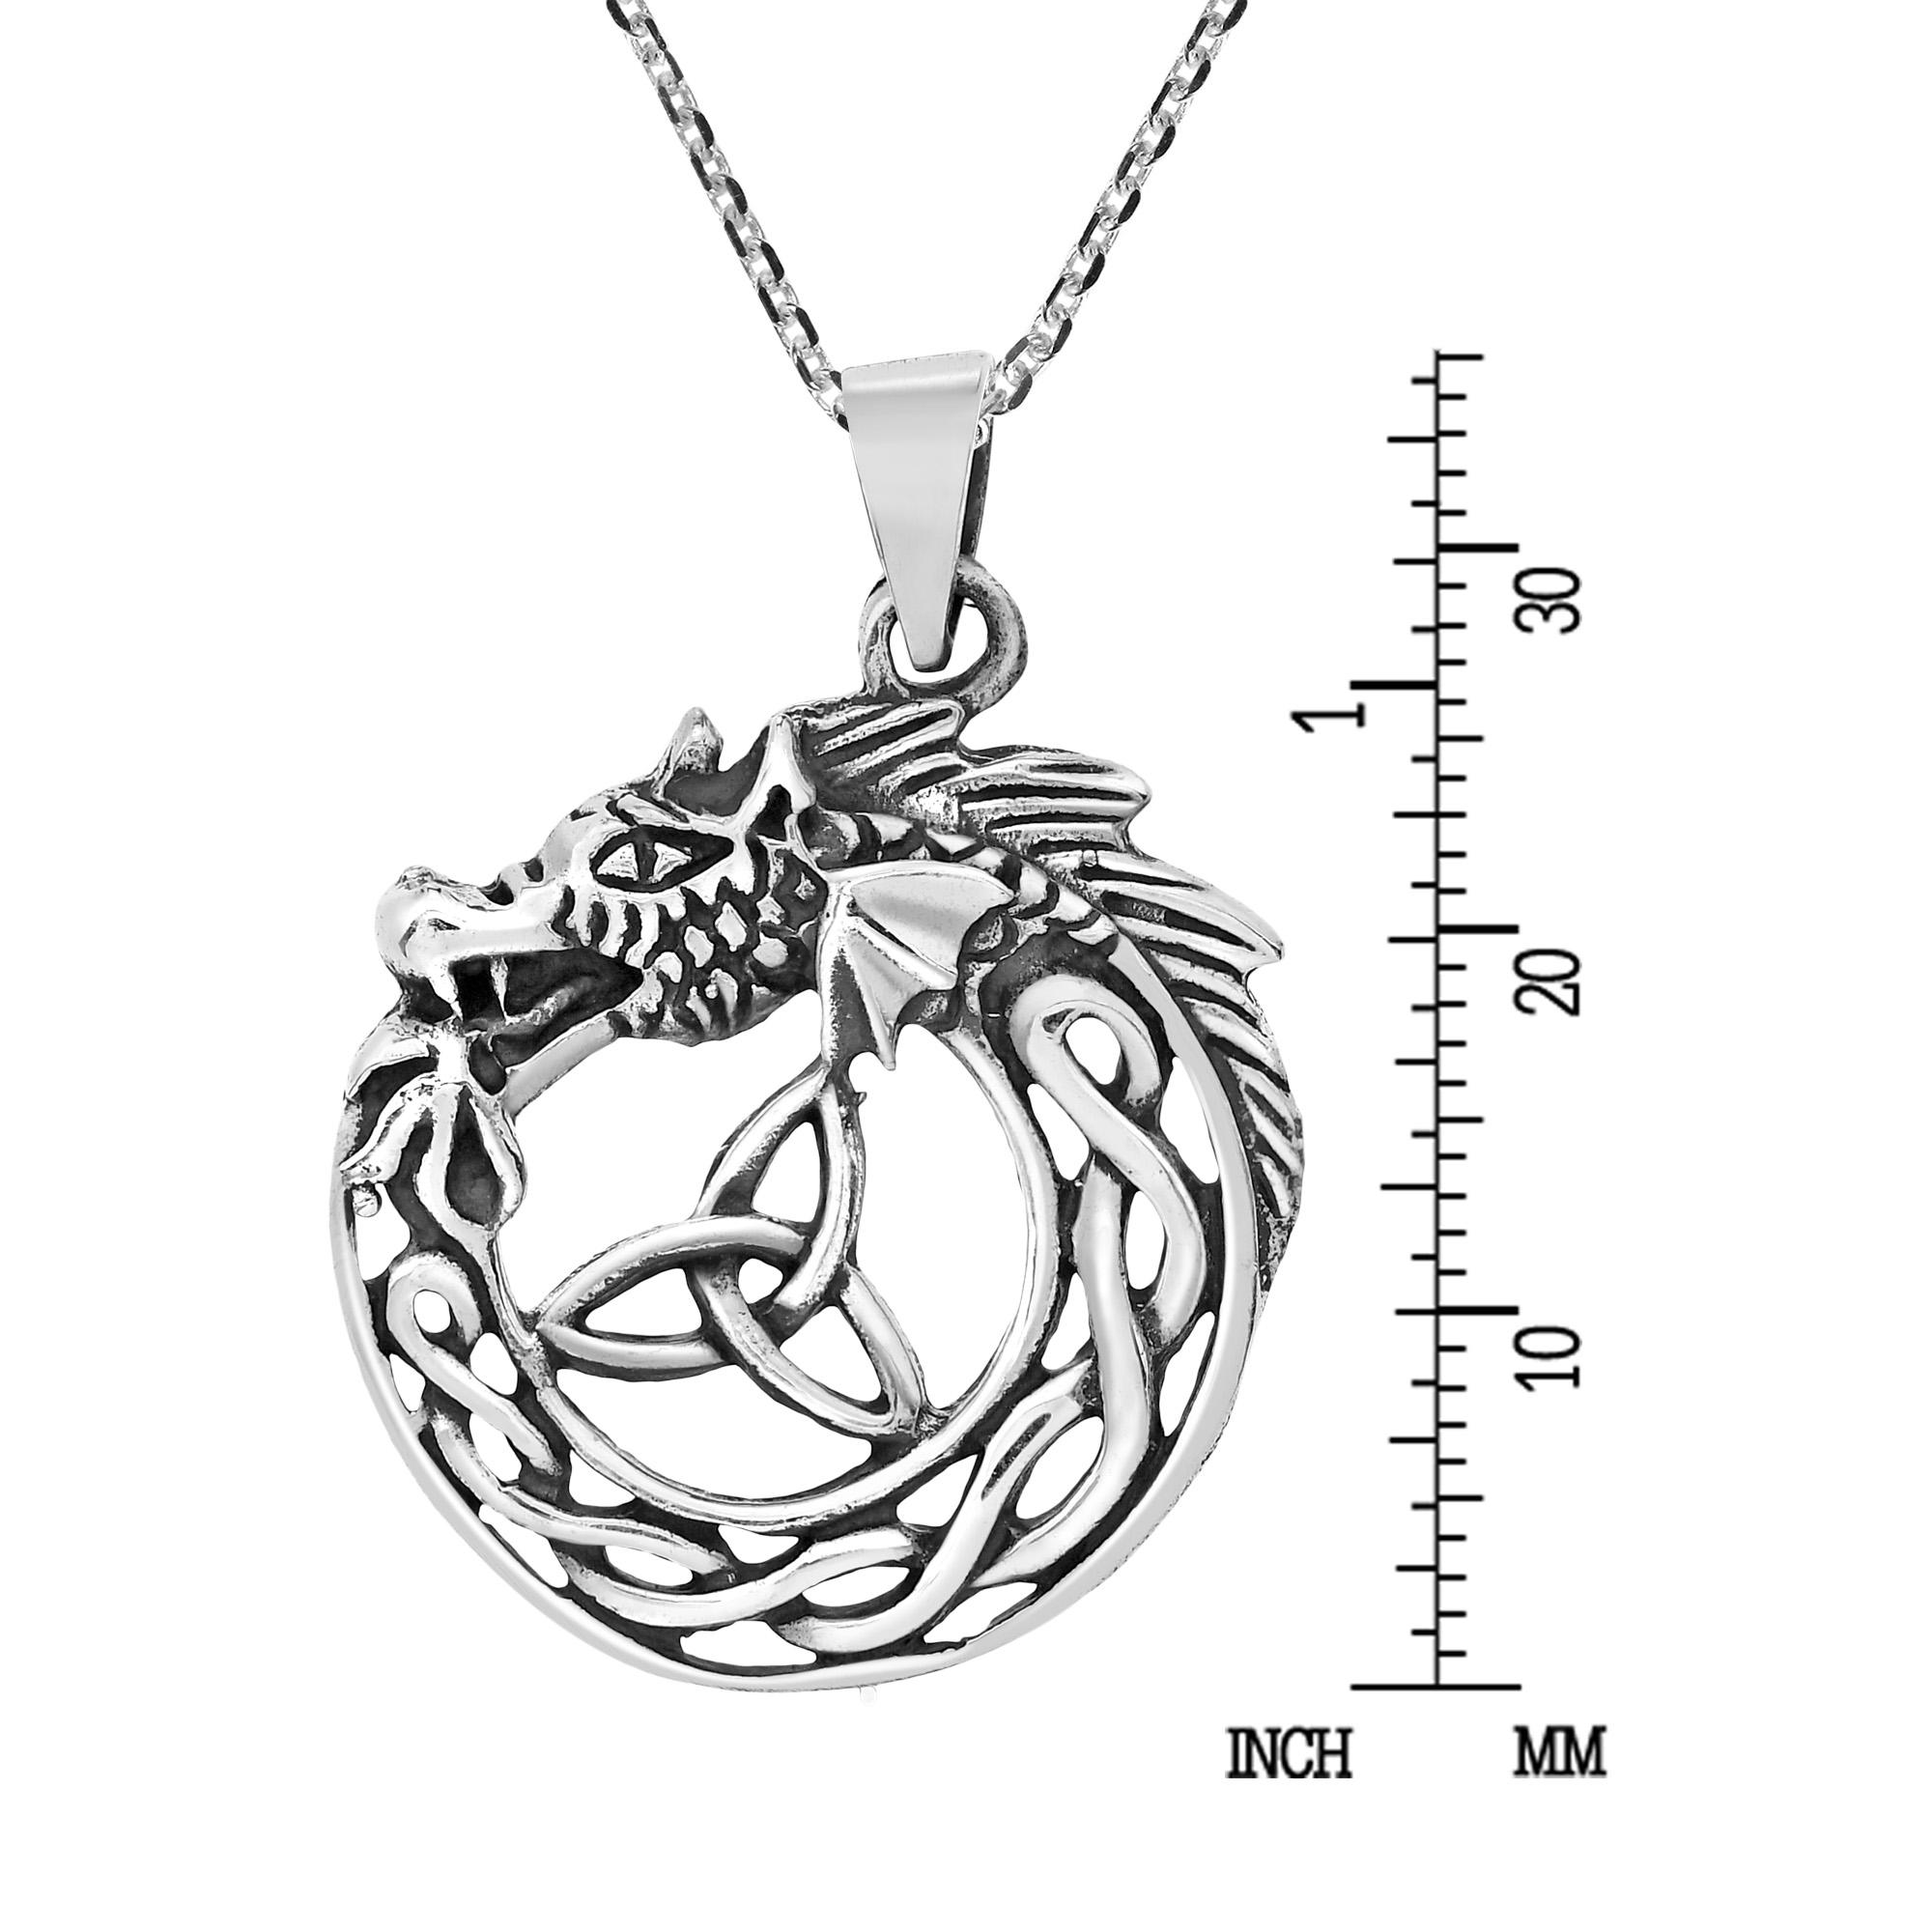 Mystic Ouroboros and Celtic Knot Sterling Silver Pendant Necklace